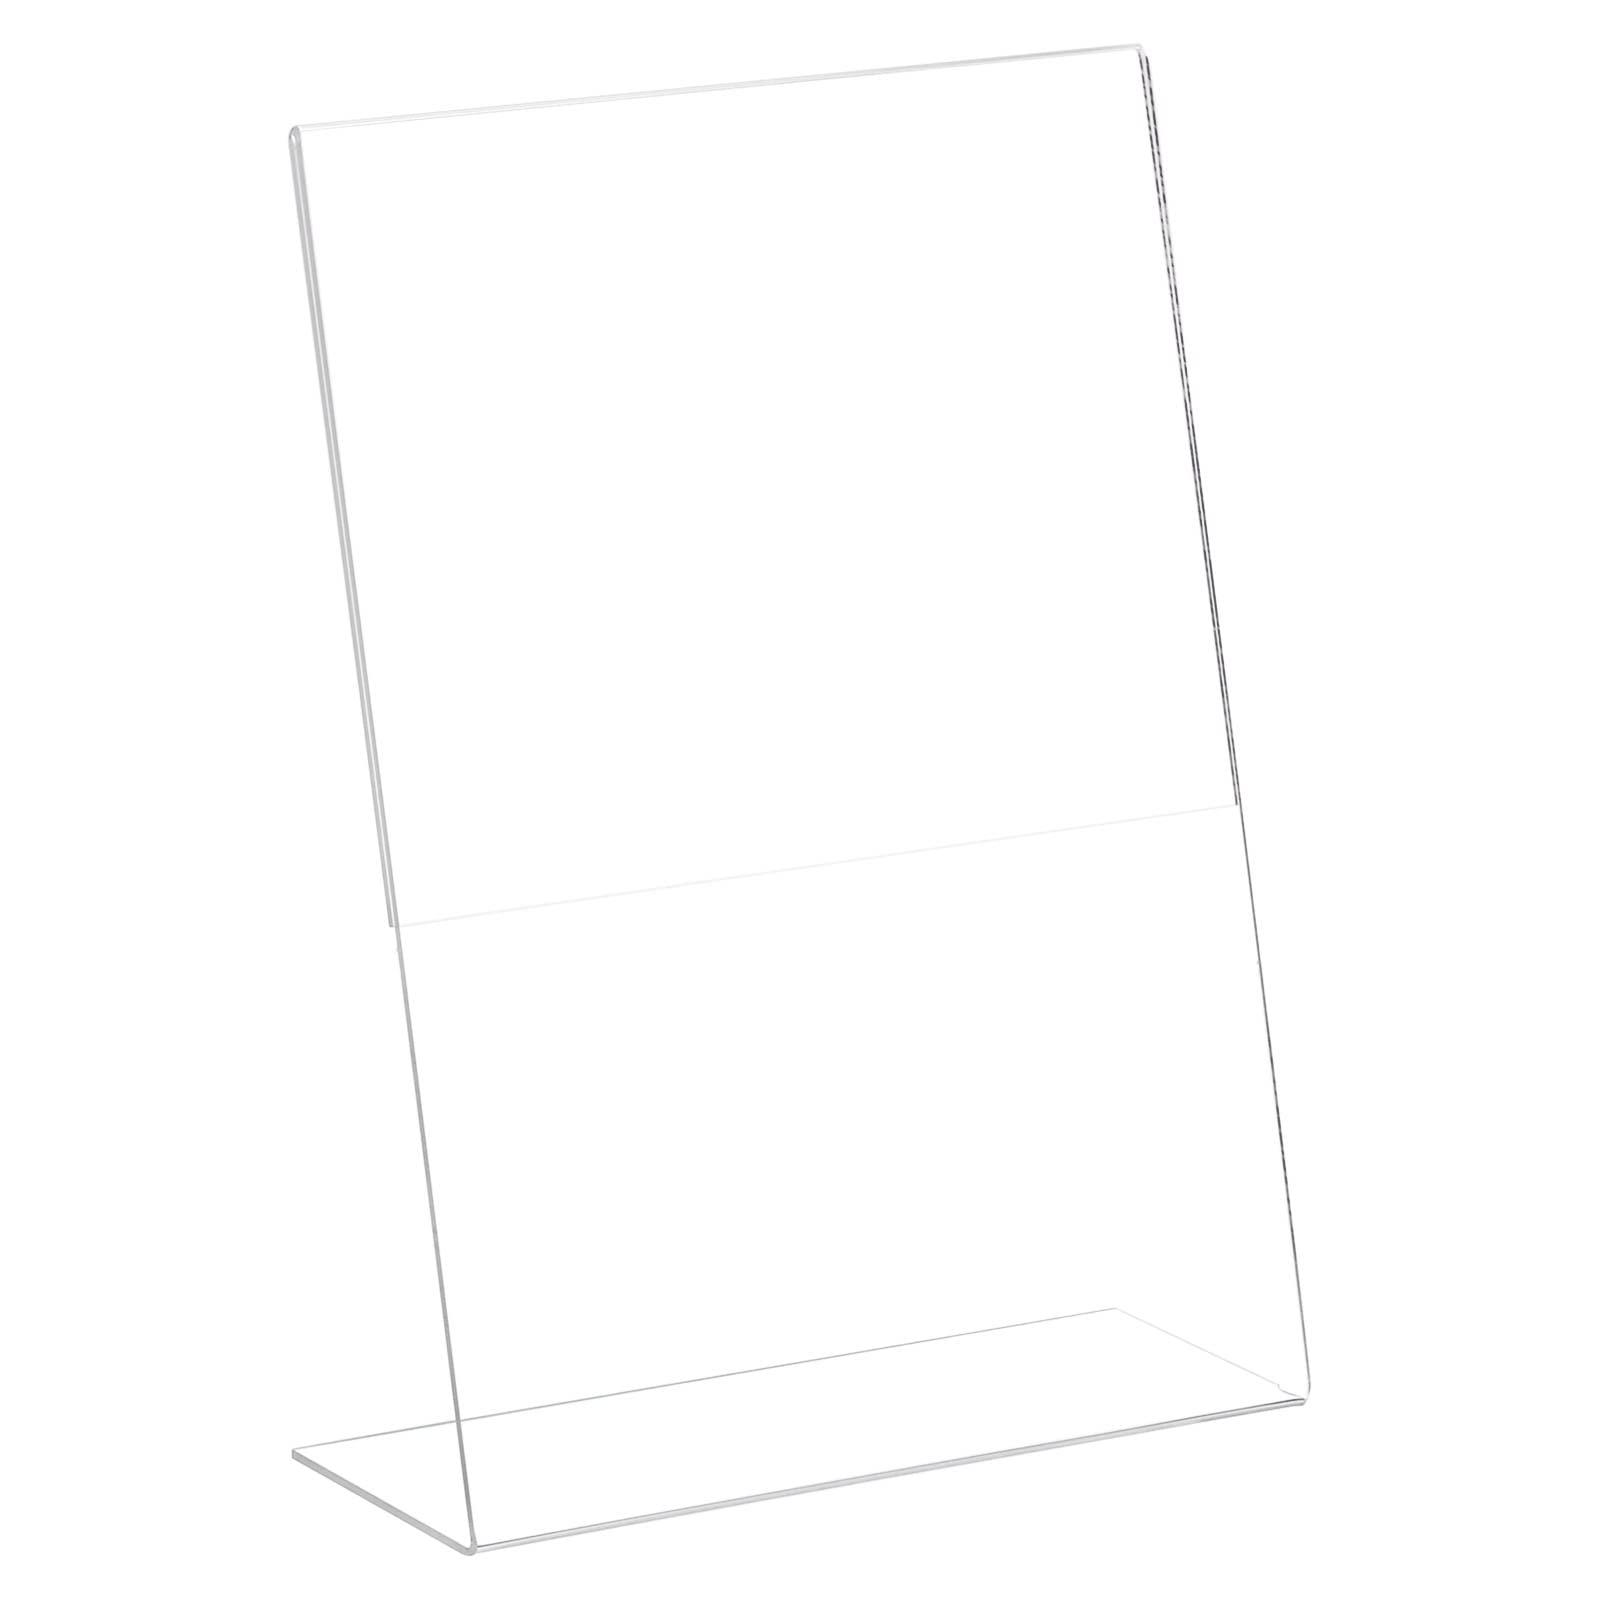 sourcing map Acrylic Sign Holder 24 Pack, 8.5x11 Inches L Shaped Desktop Sign Holder Menu Display Stand Suitable for Restaurants, Office, Home, Store - Clear 0